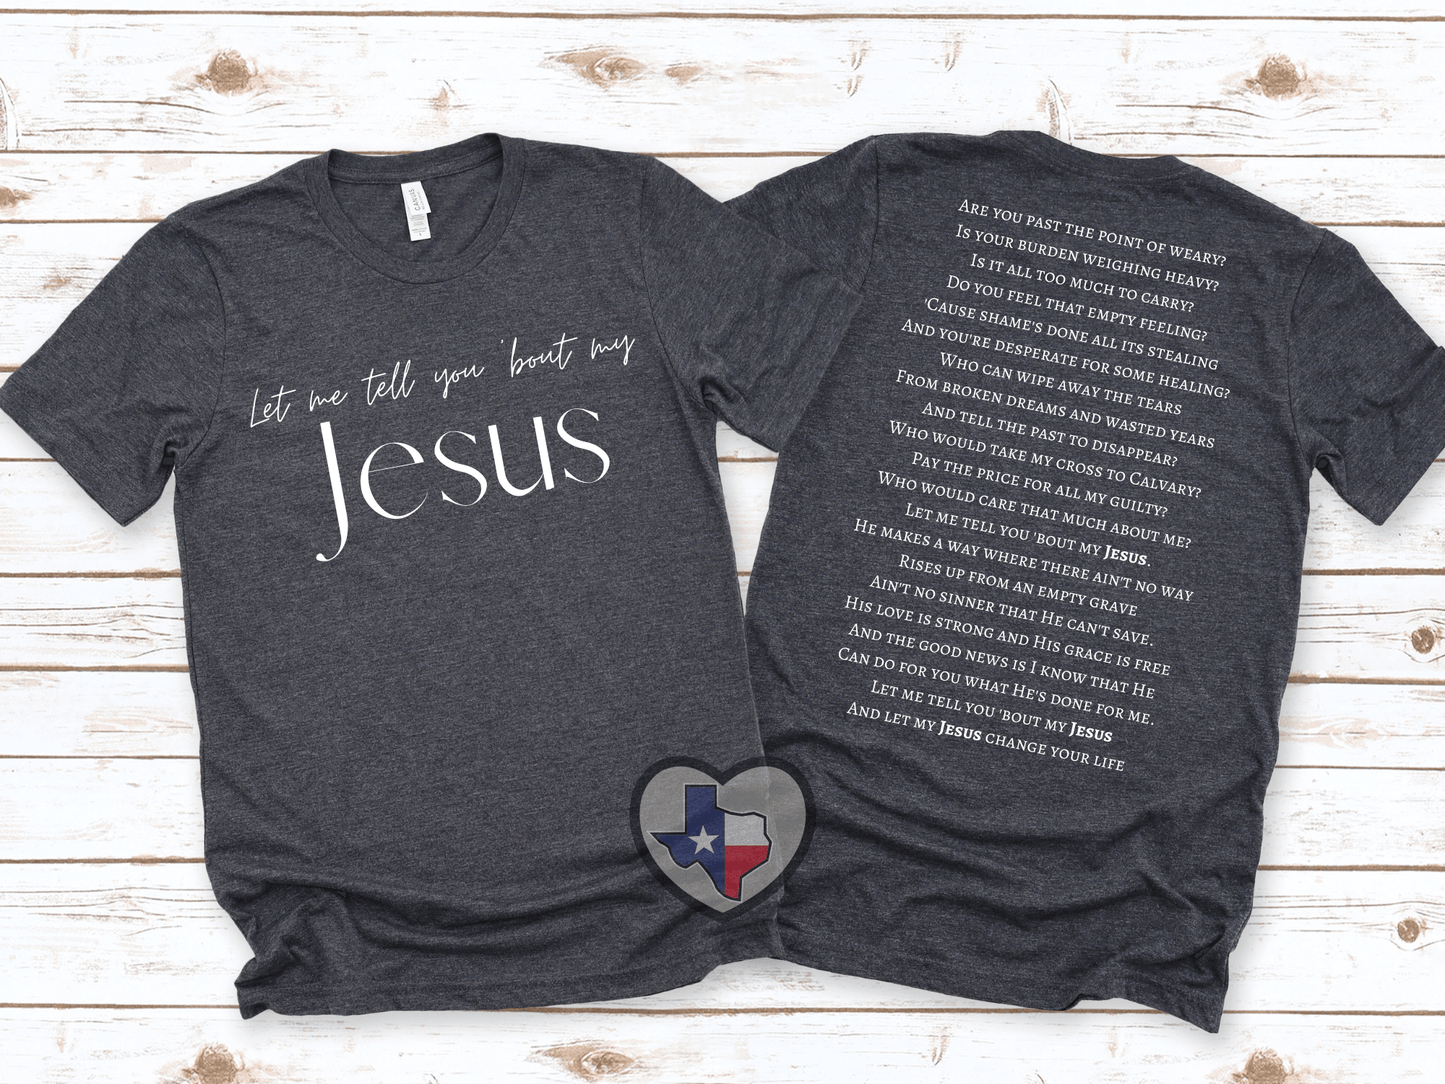 Let Me Tell You 'Bout My Jesus SET *EXCLUSIVE* - Texas Transfers and Designs